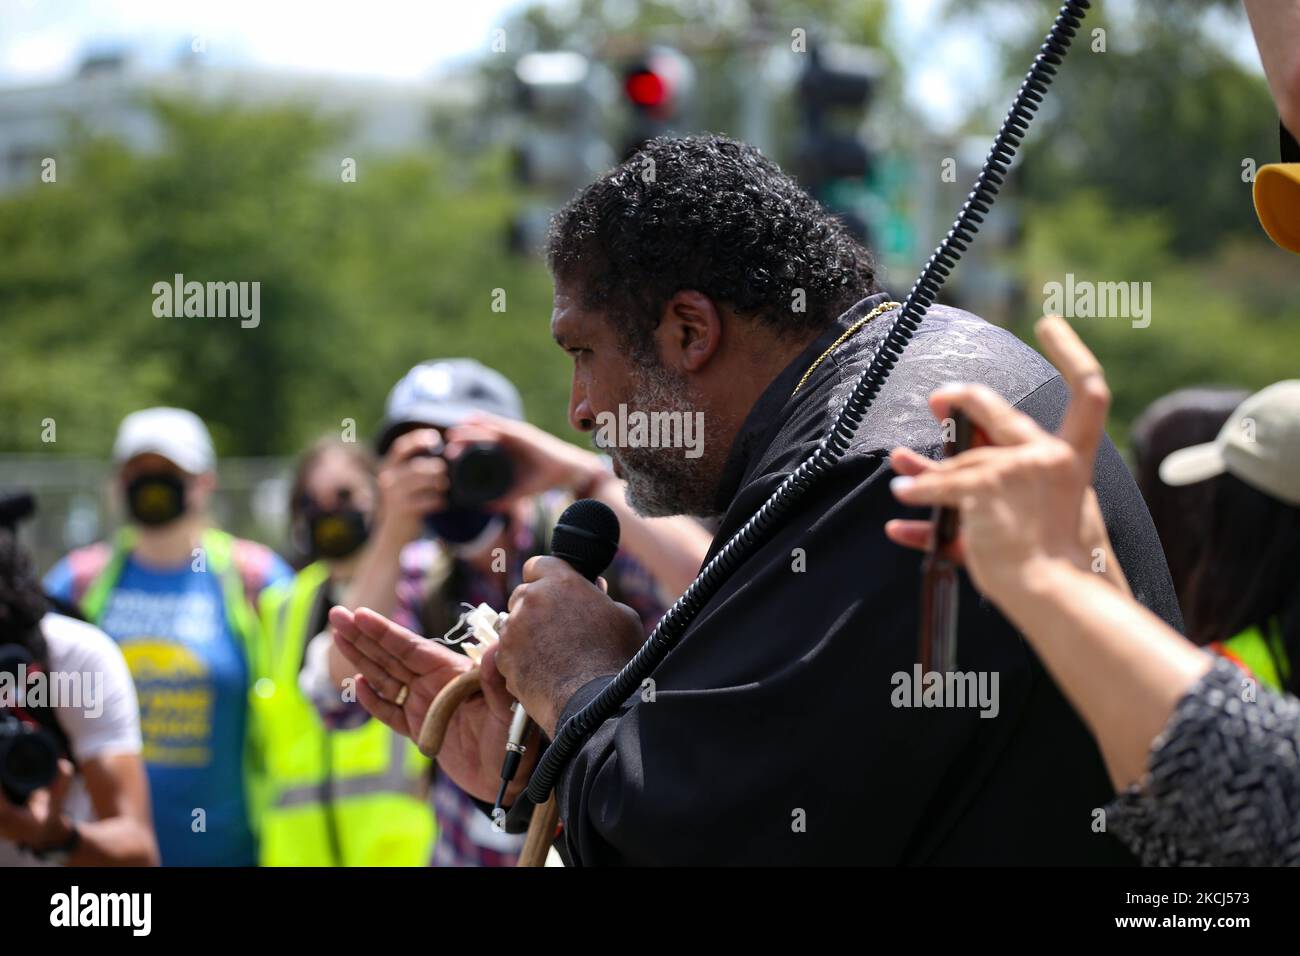 Reverend William Barber II speaks at the Poor People's Campaign Moral Monday demonstration and civil disobedience action near the U.S. Capitol in Washington, D.C. on August 2, 2021 (Photo by Bryan Olin Dozier/NurPhoto) Stock Photo